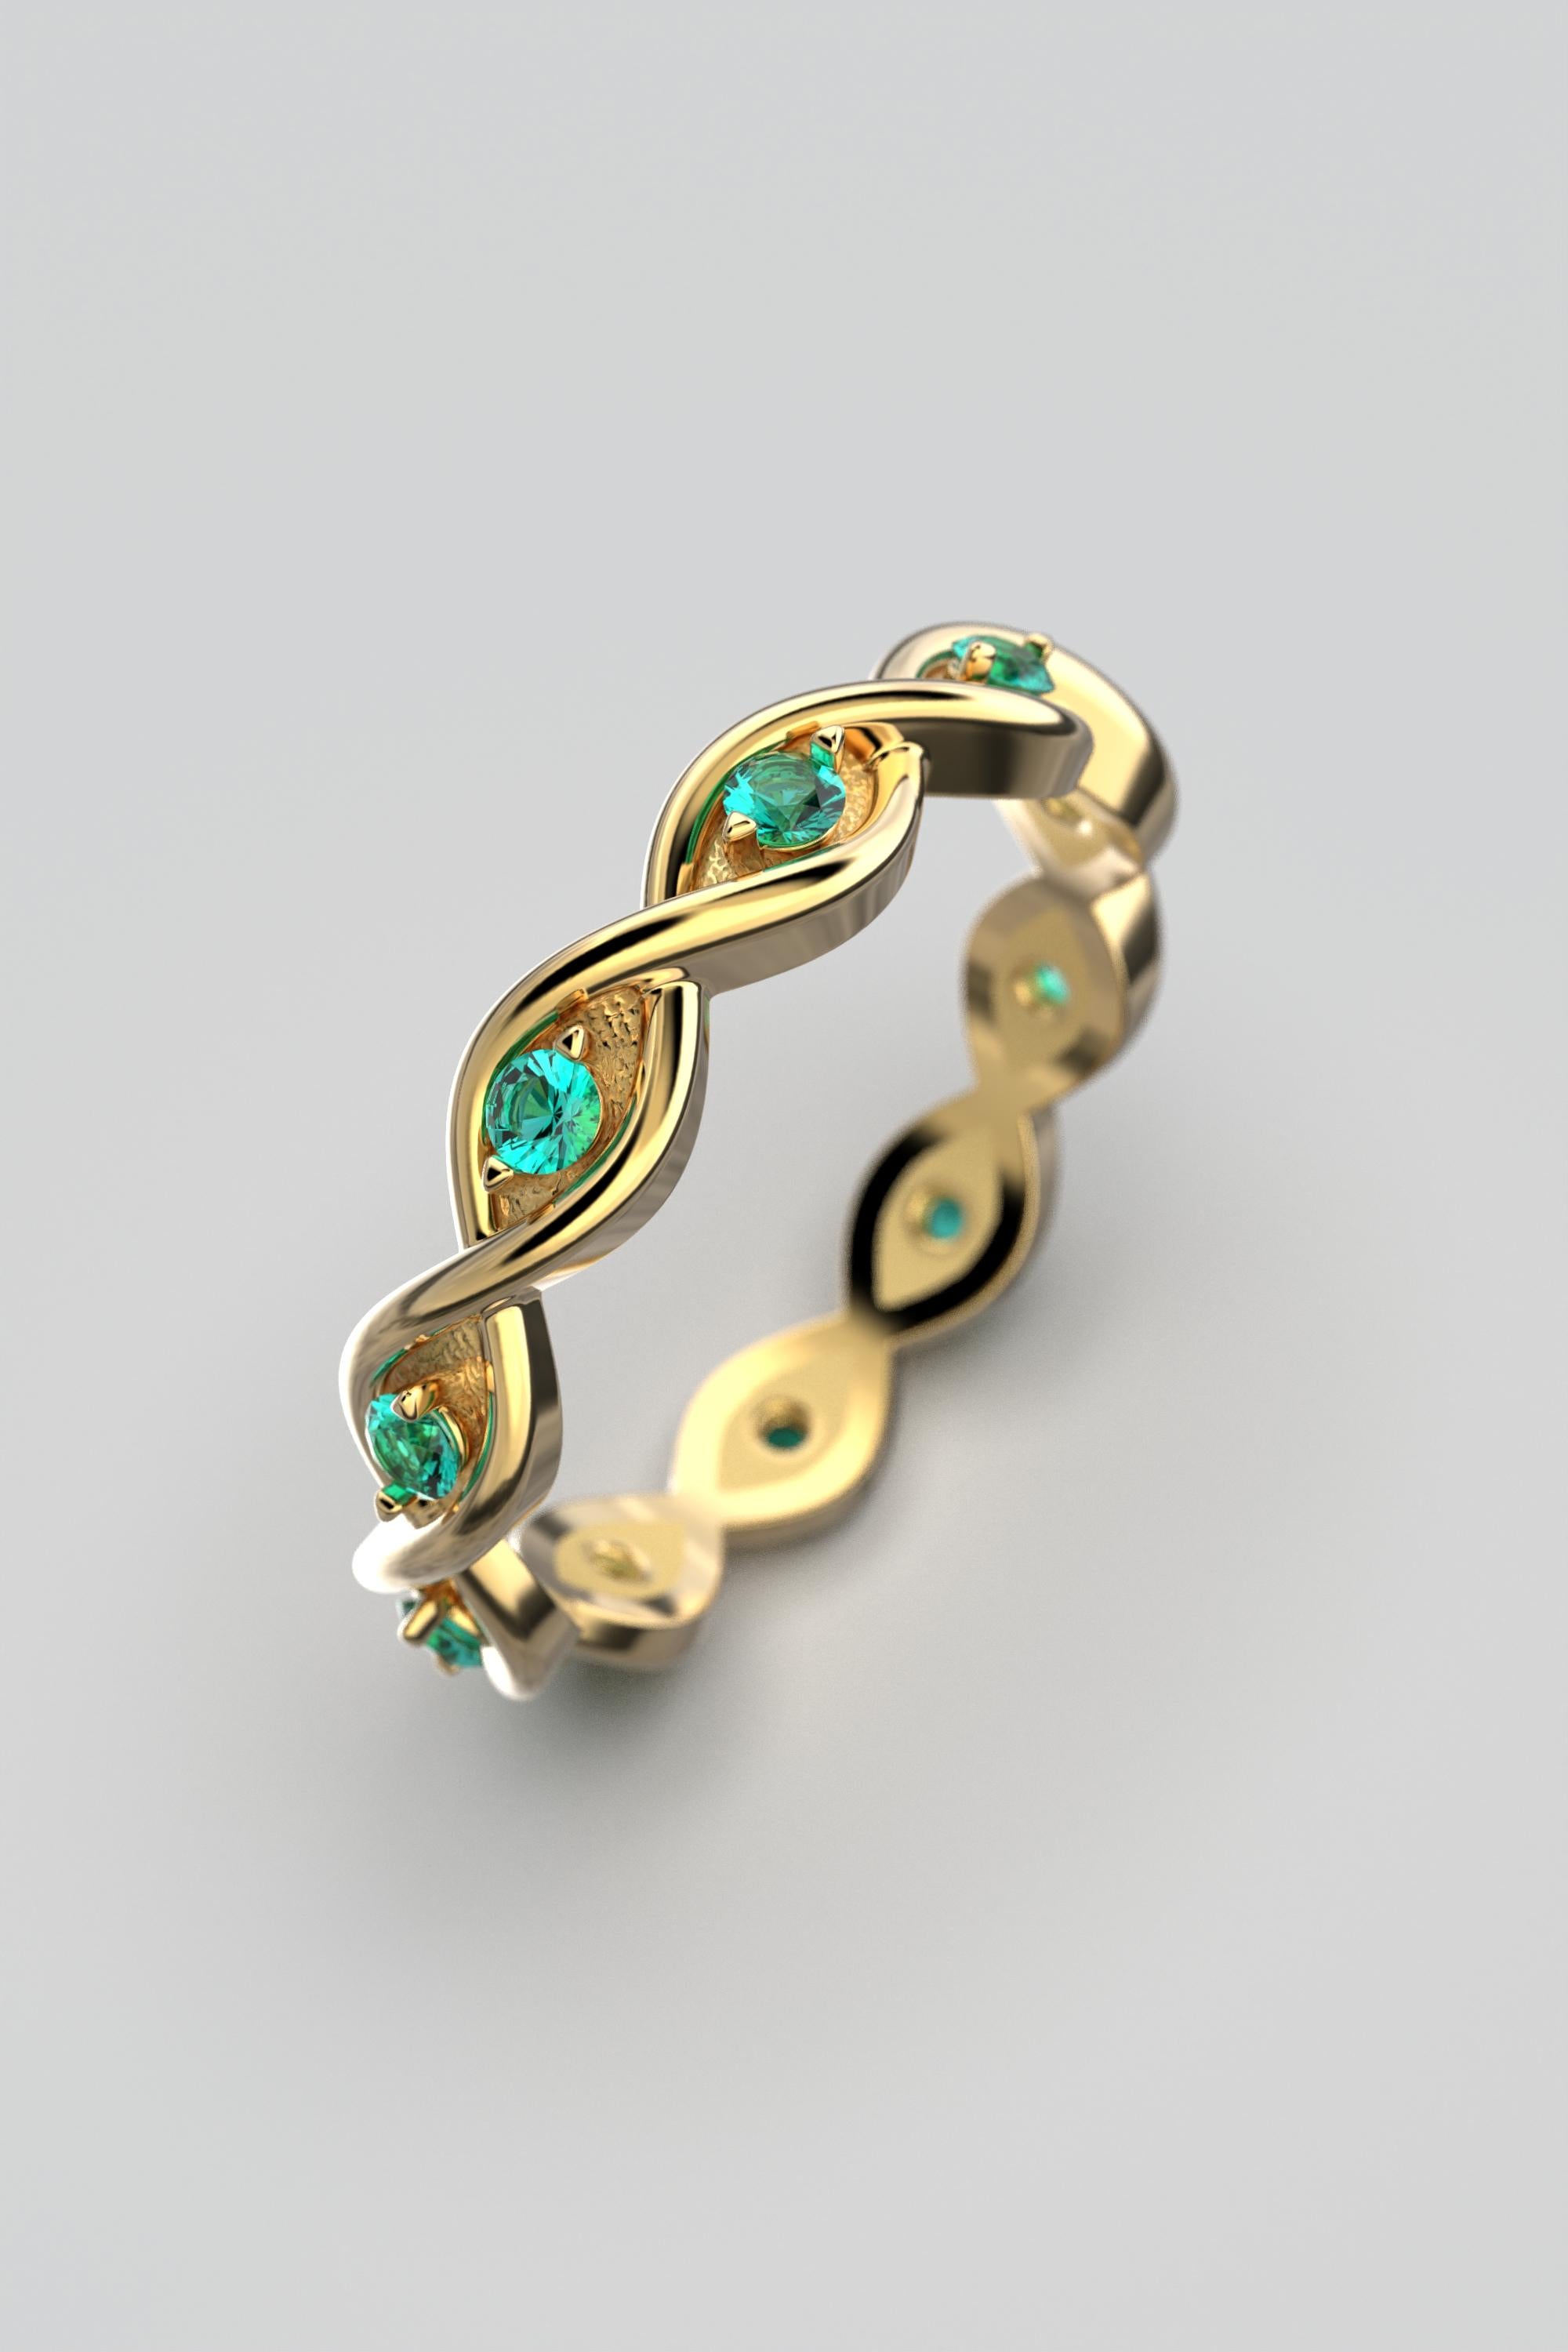 For Sale:  Oltremare Gioielli Emerald Gold Eternity Band in 14k, Made in Italy 2